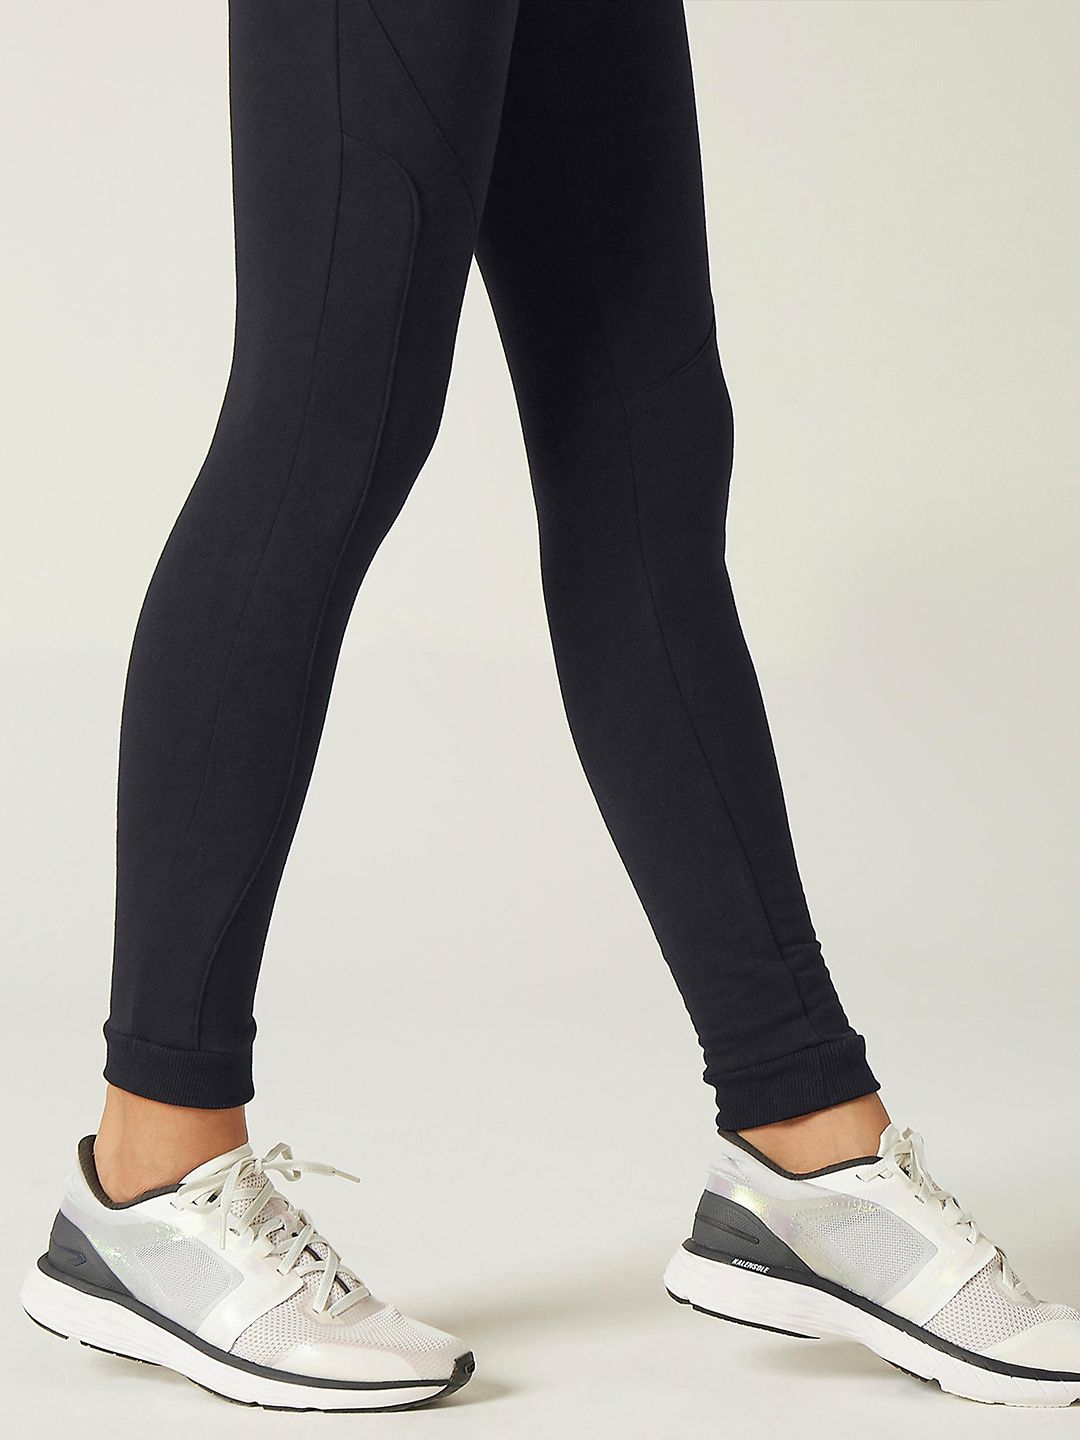 NYAMBA By Decathlon Women Black Solid Jogging Tights Price in India